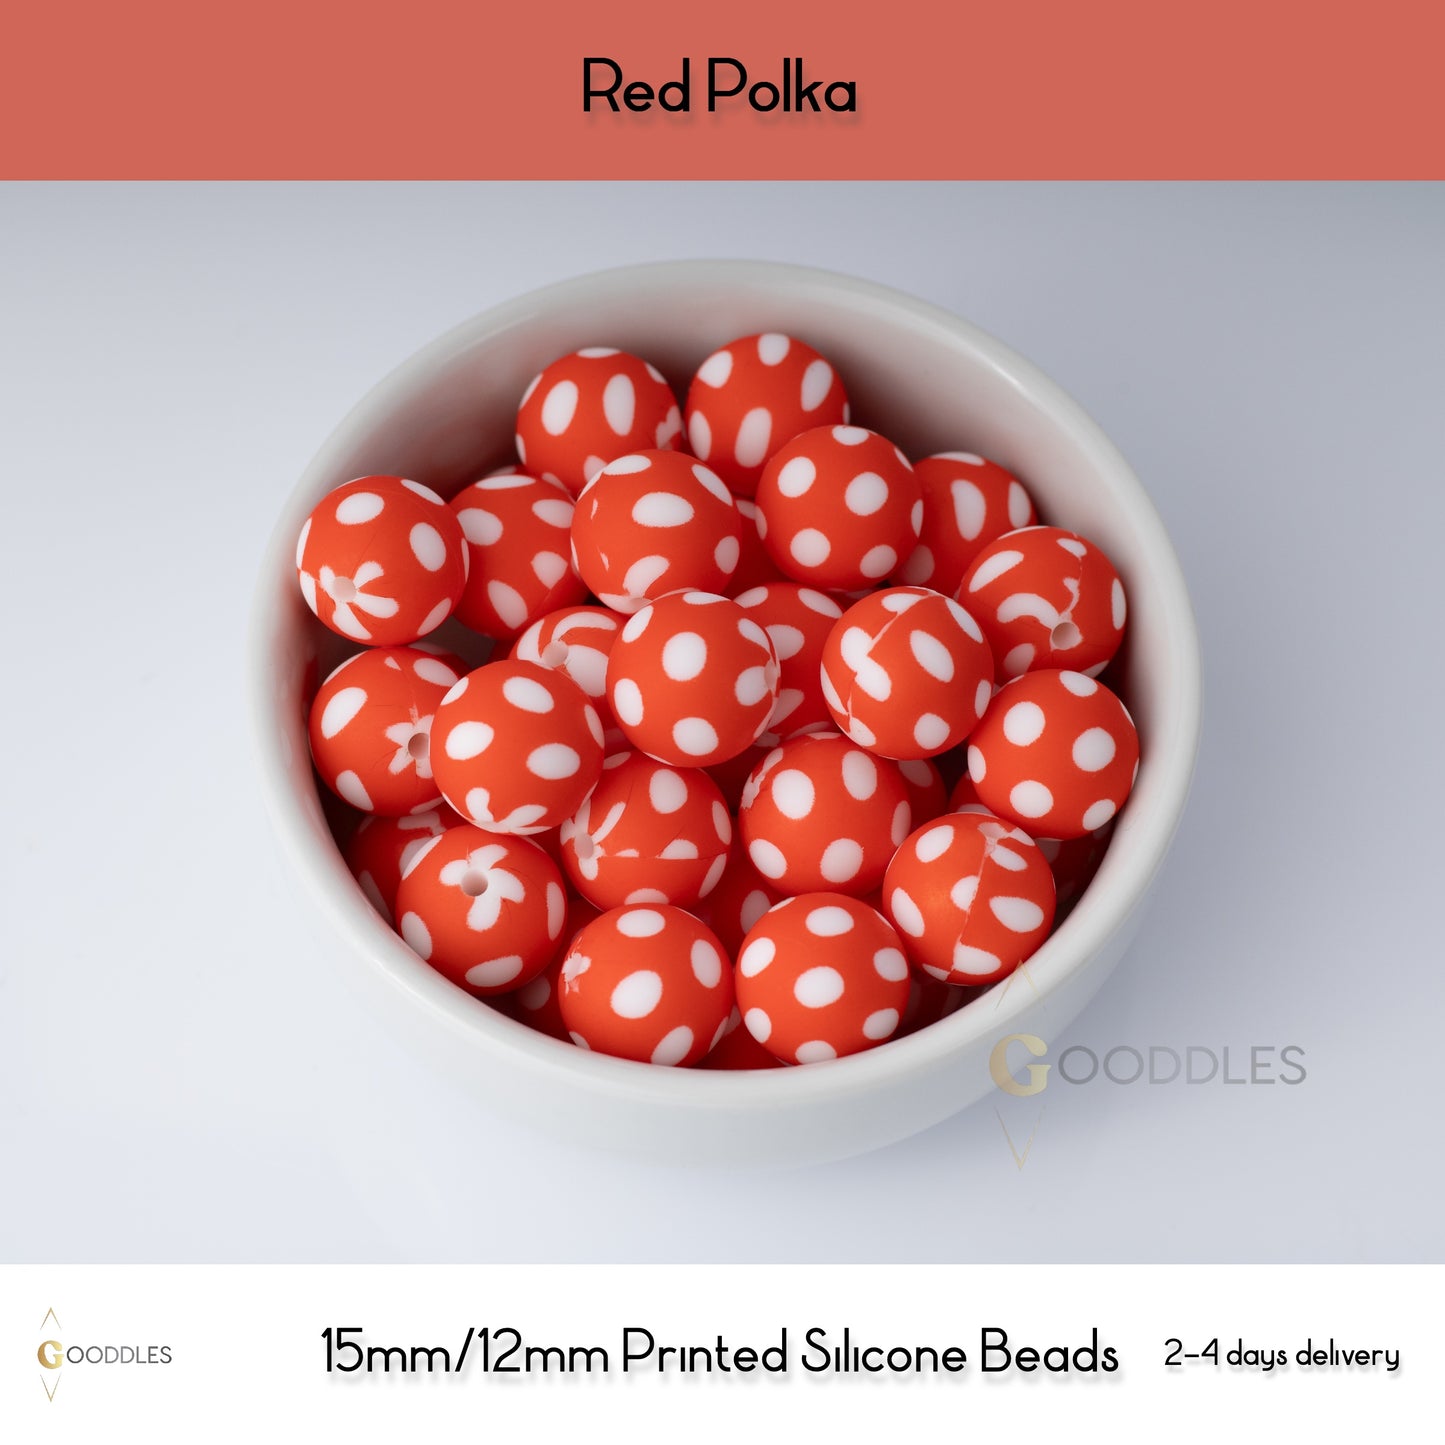 5pcs, Red Polka Silicone Beads Printed Round Silicone Beads